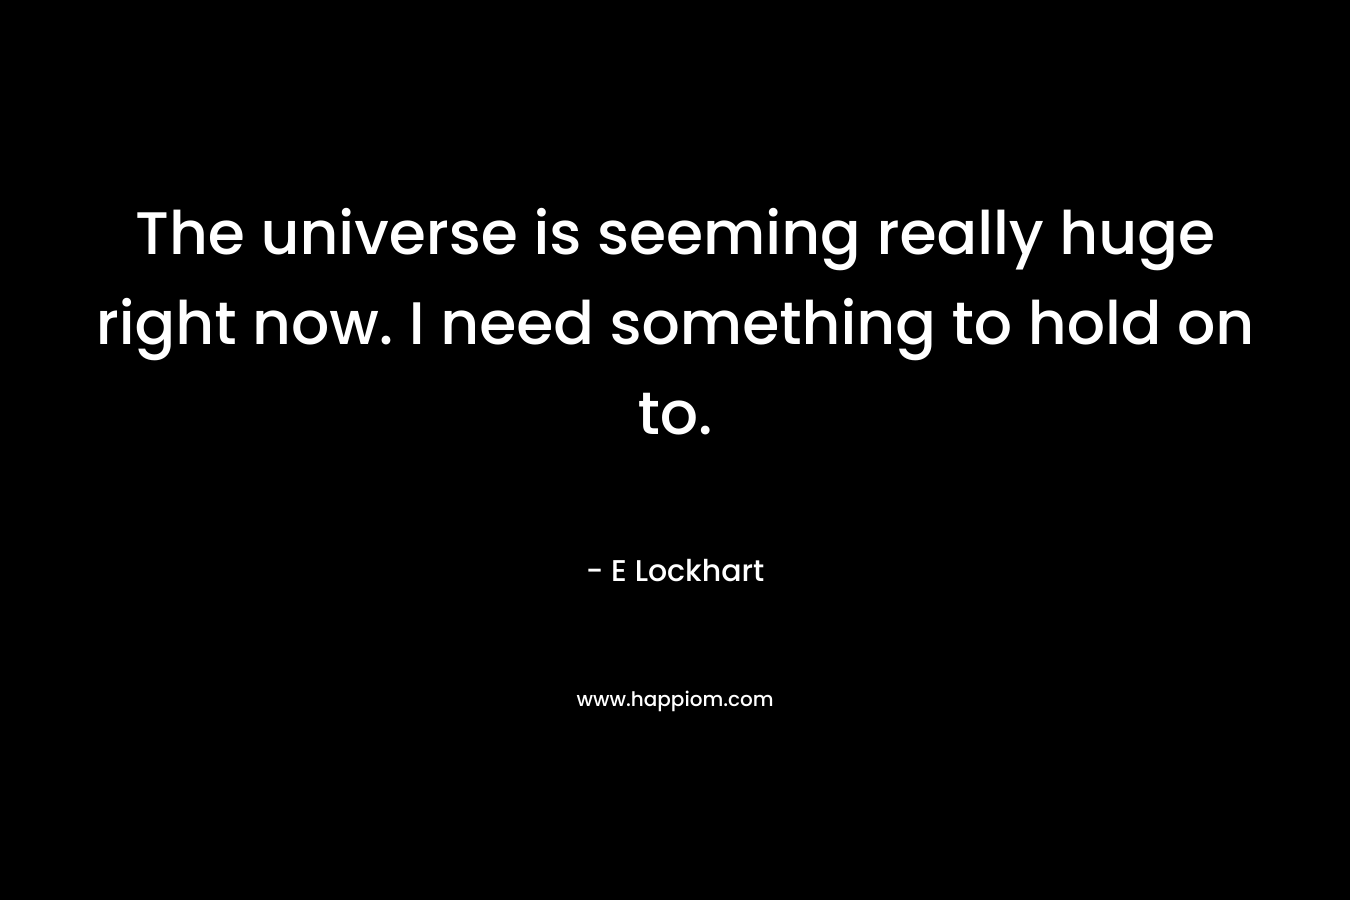 The universe is seeming really huge right now. I need something to hold on to.